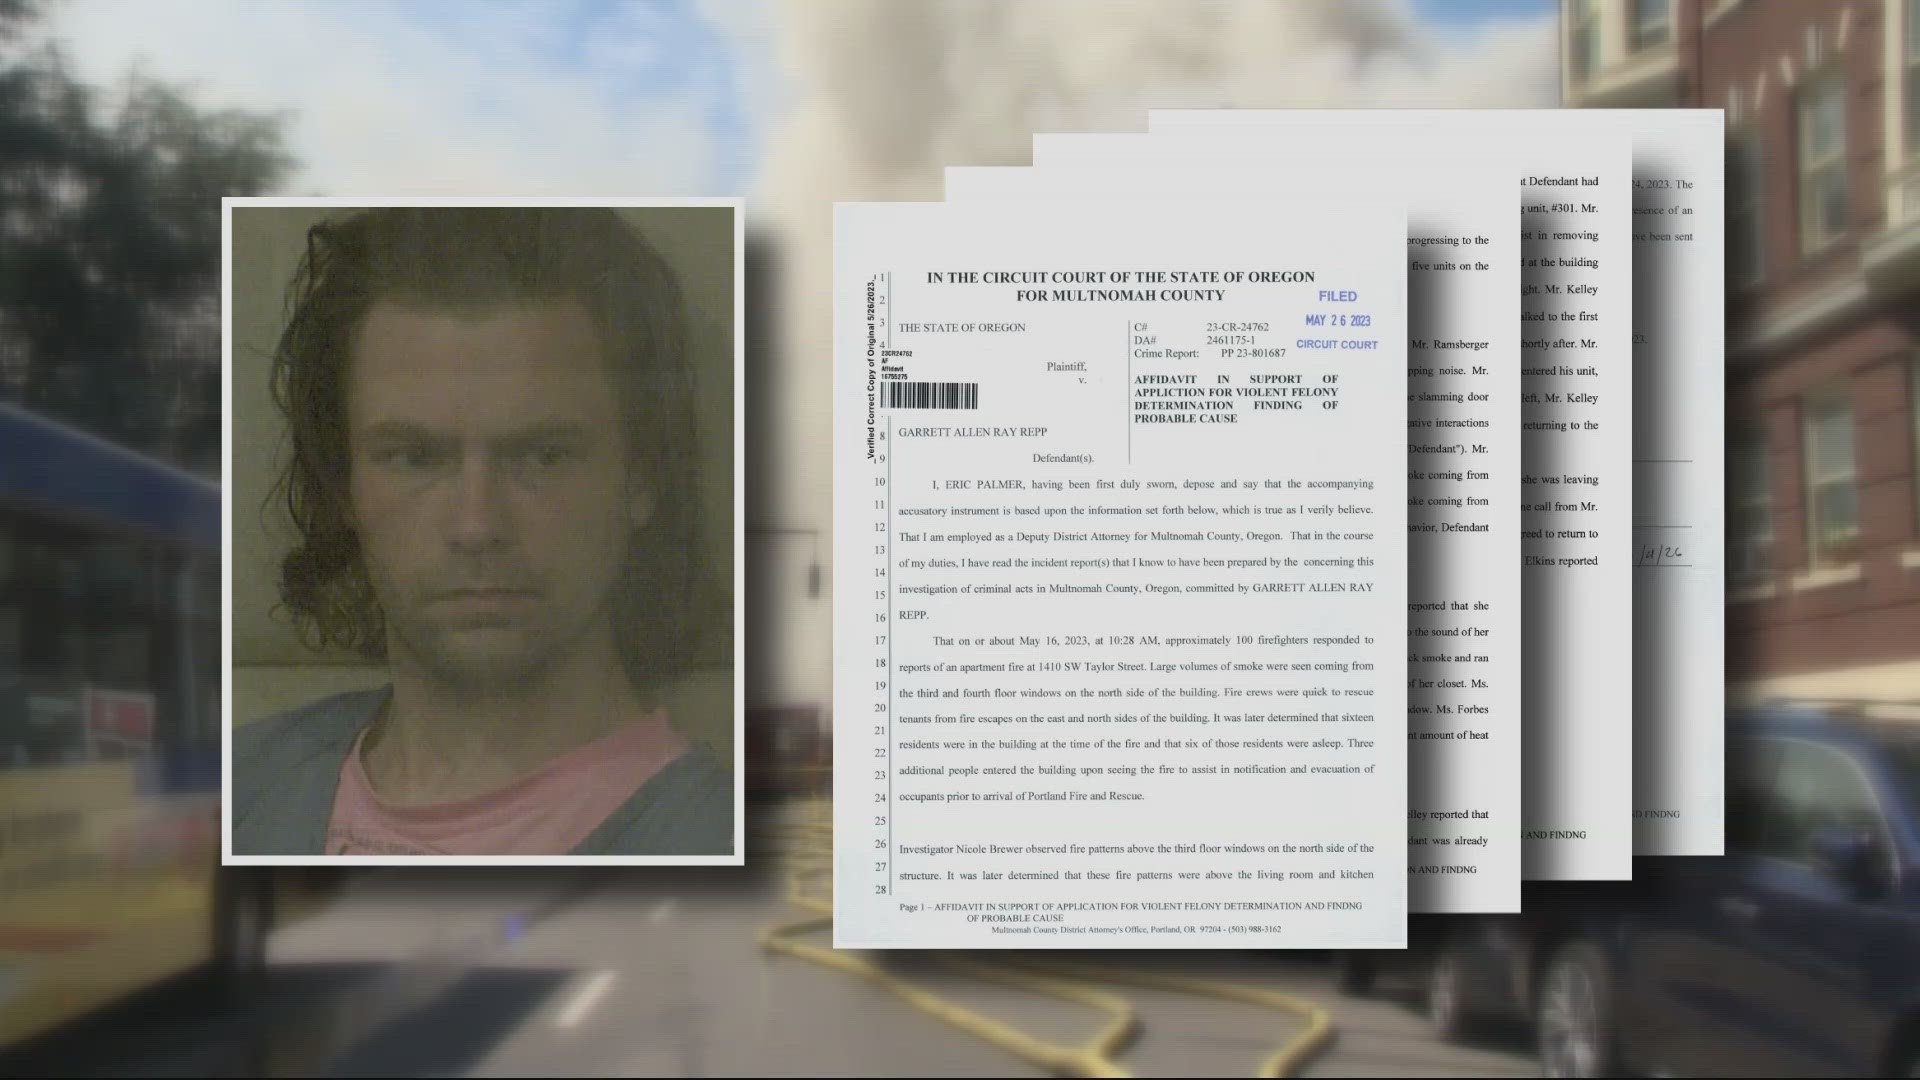 Garrett Repp is alleged to have started the fire in his own apartment less than two hours before police were scheduled to remove him, according to court documents.